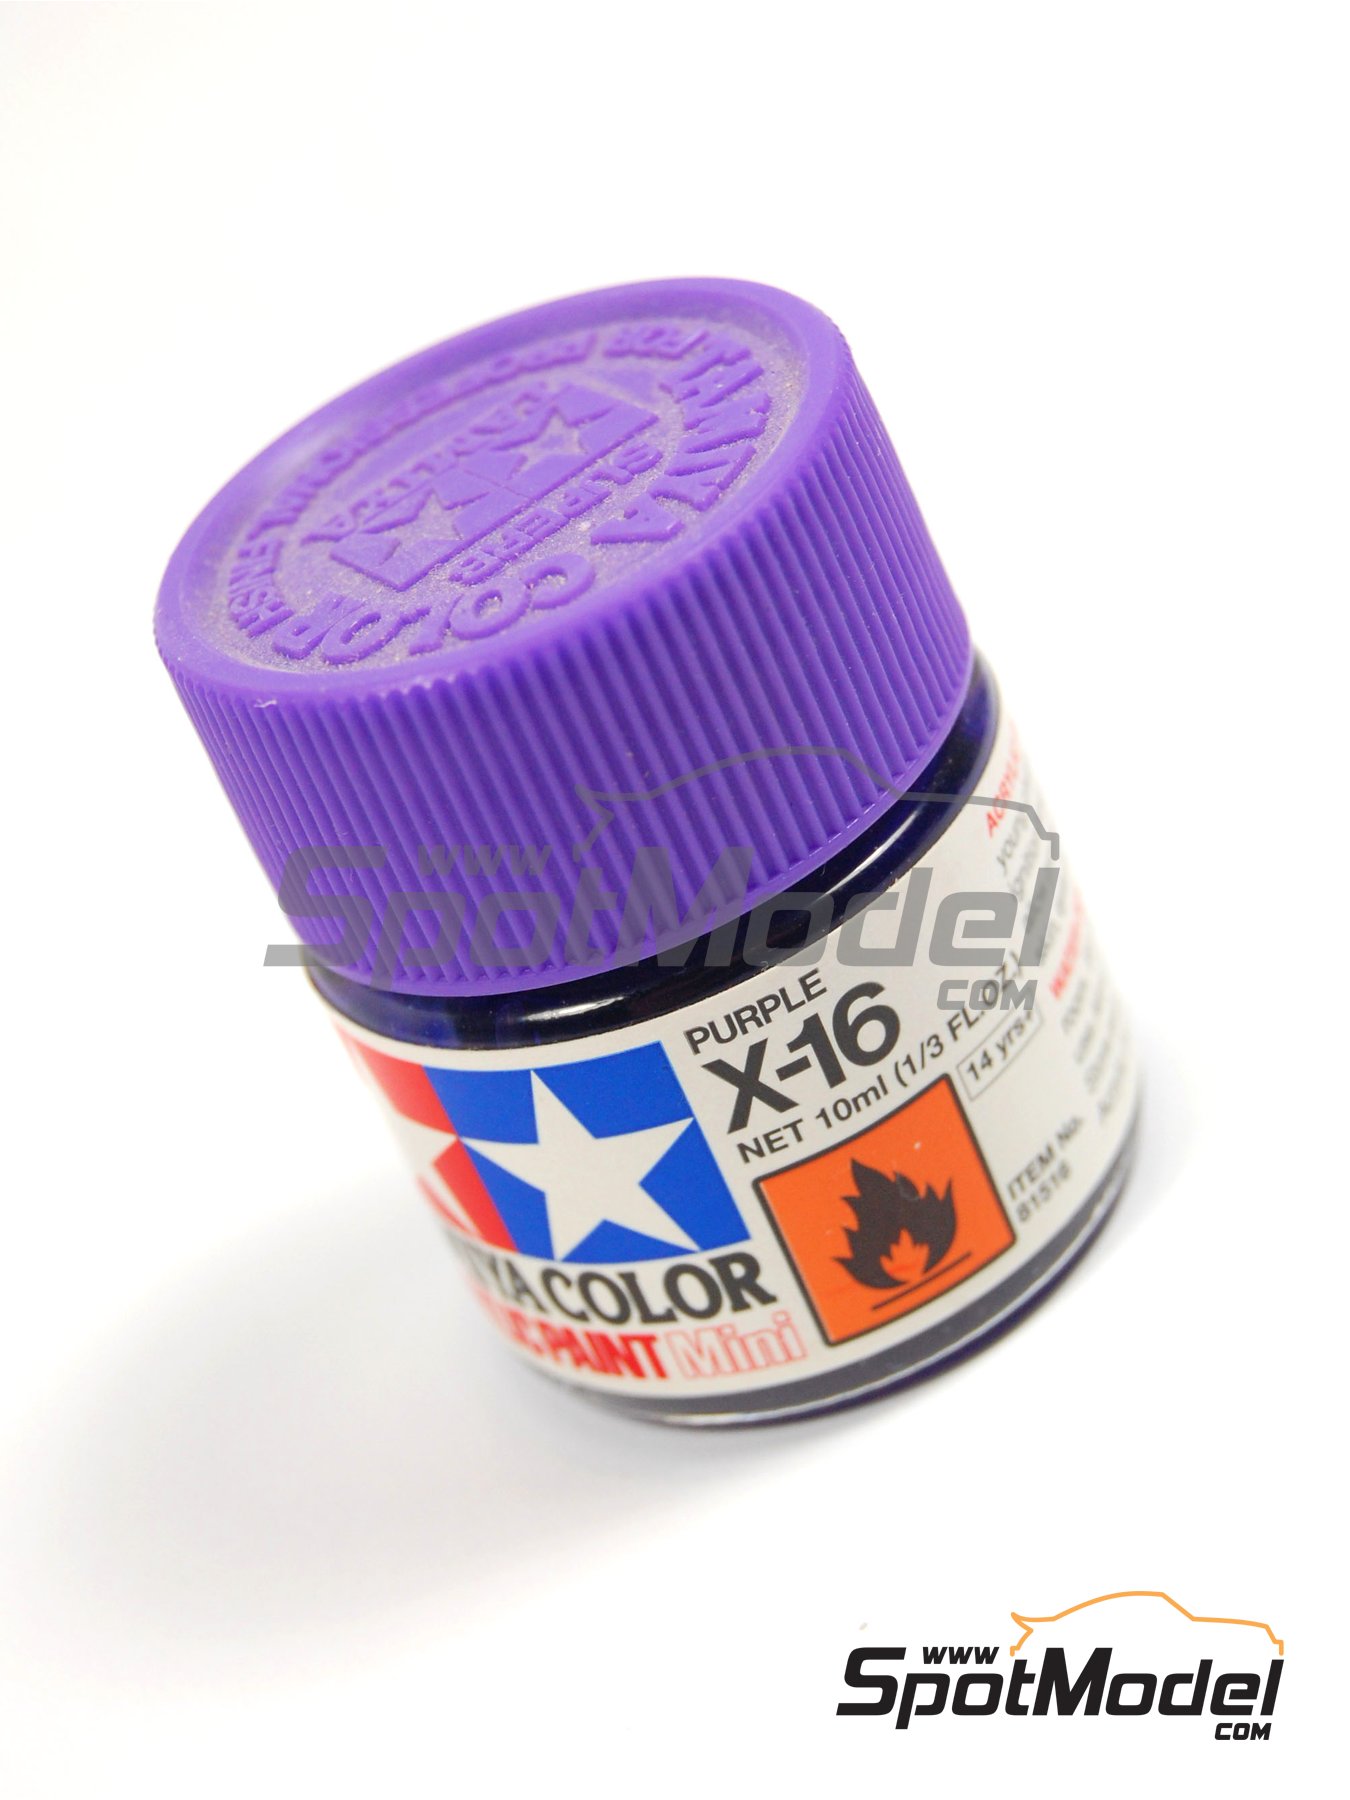 What top coat is more suitable for acrylic painted models